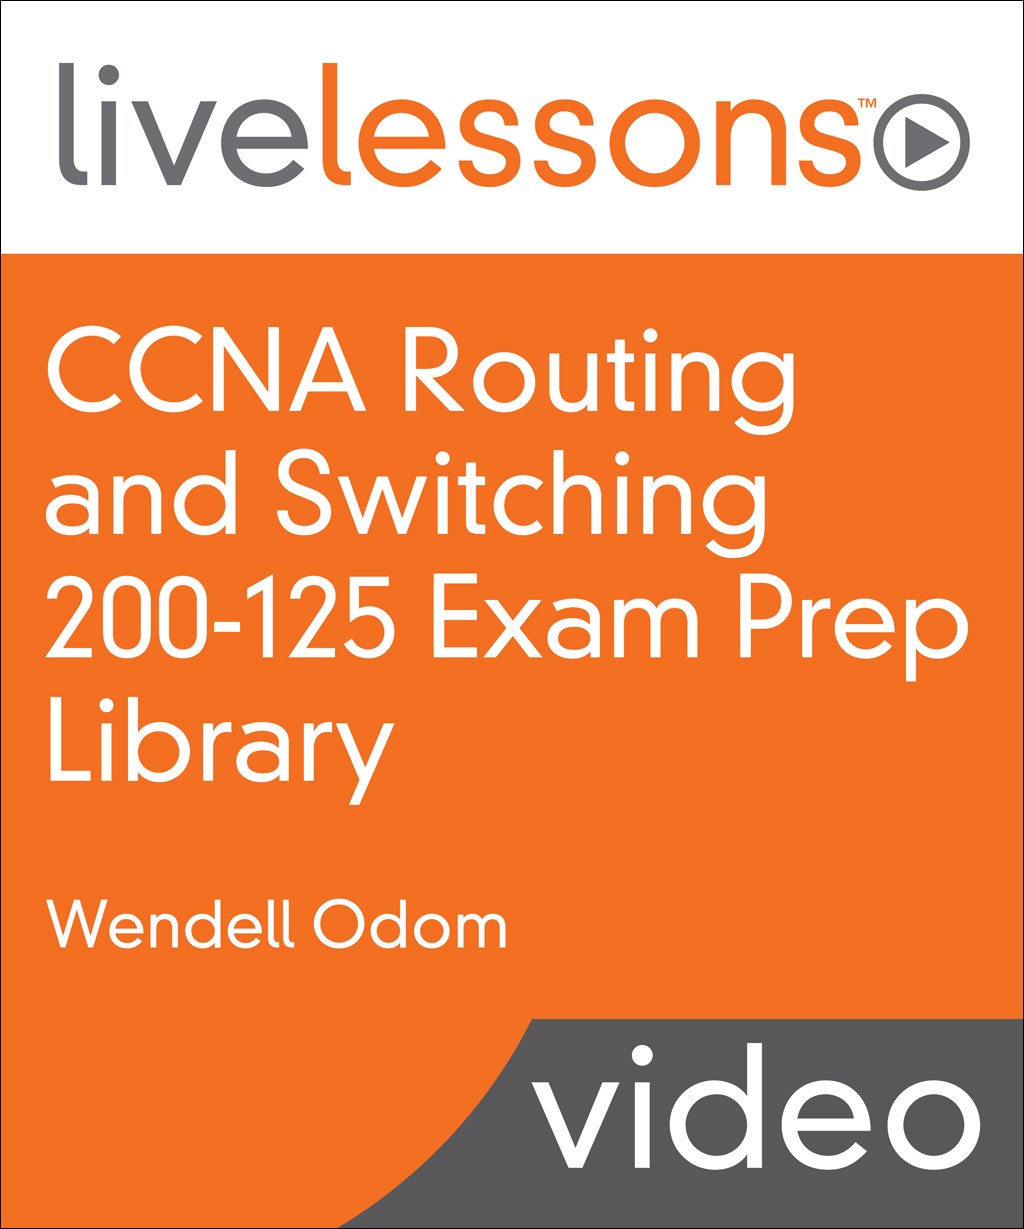 CCNA Routing and Switching 200-125 Exam Prep LiveLessons Library